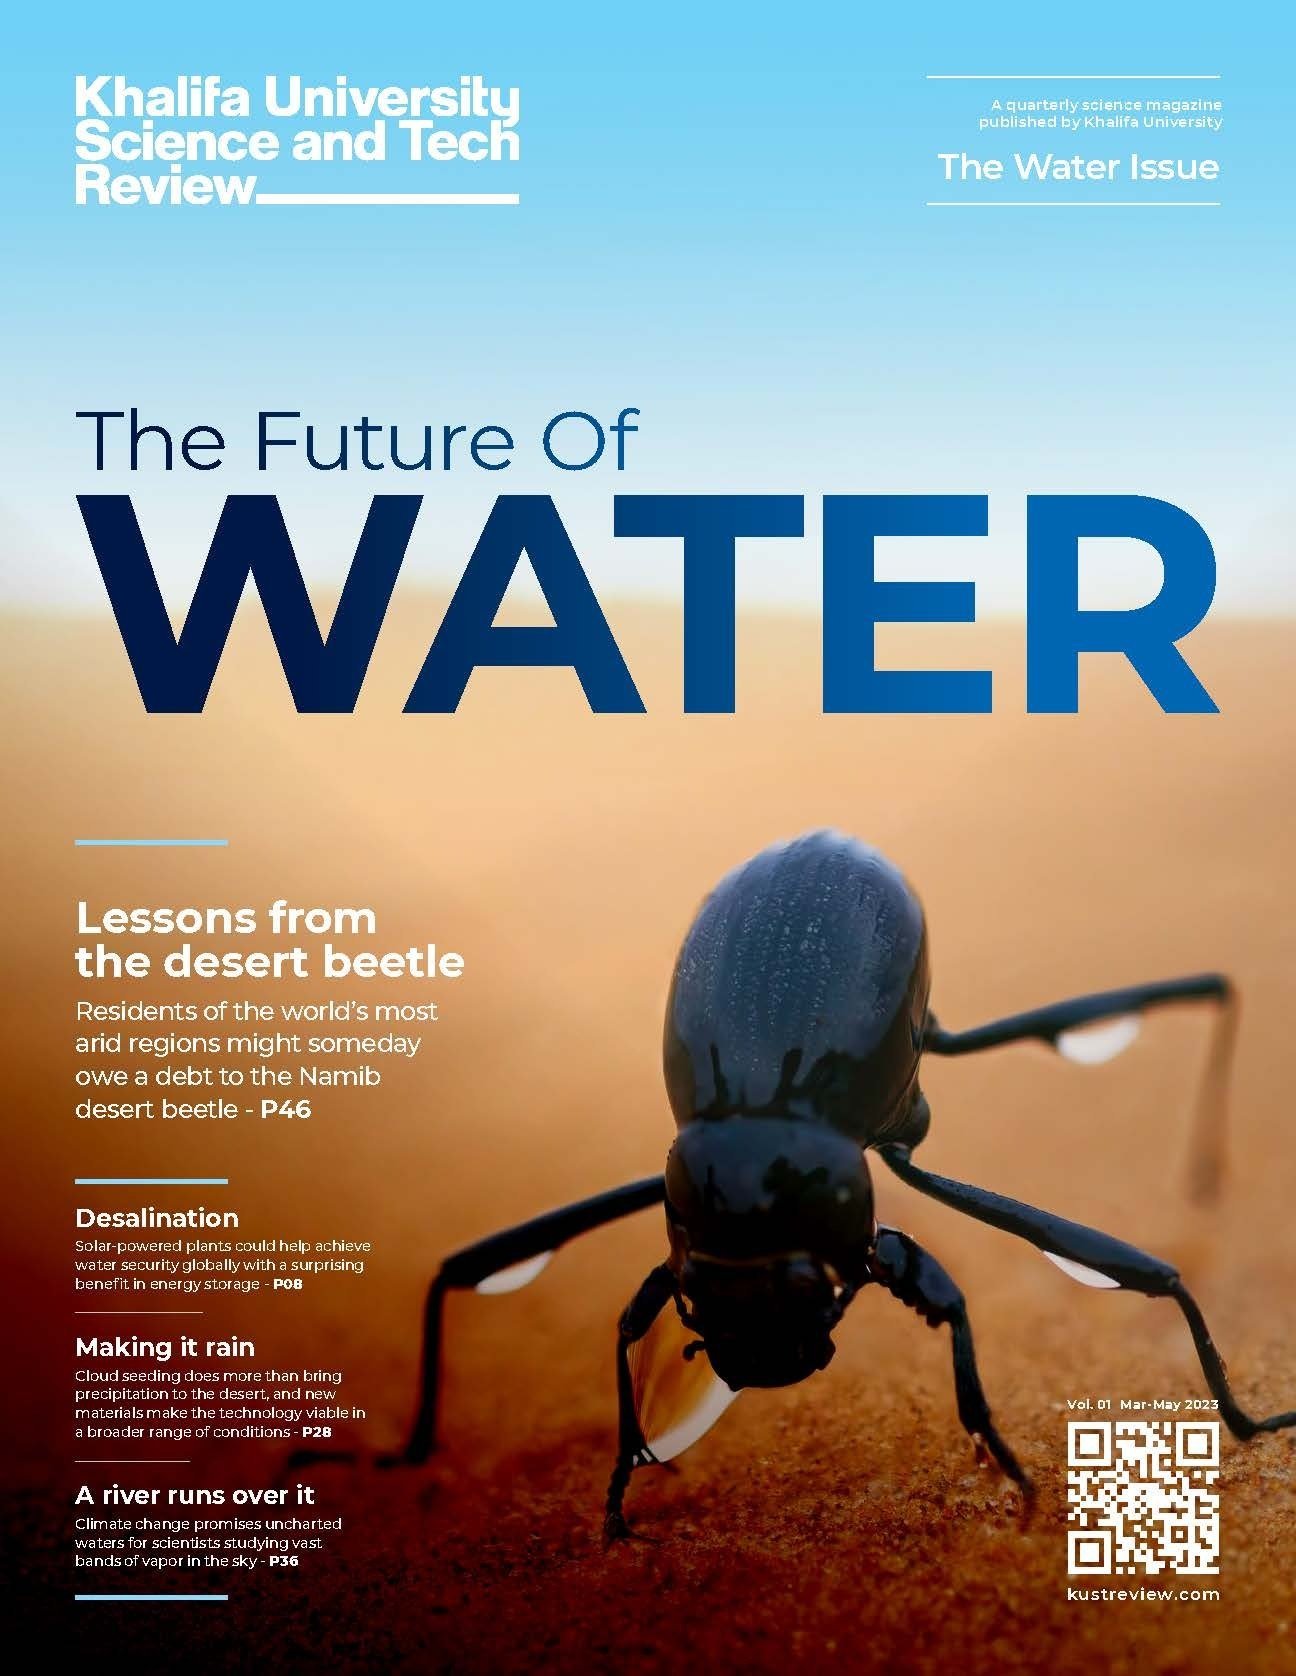 Issue 1: The Future of Water